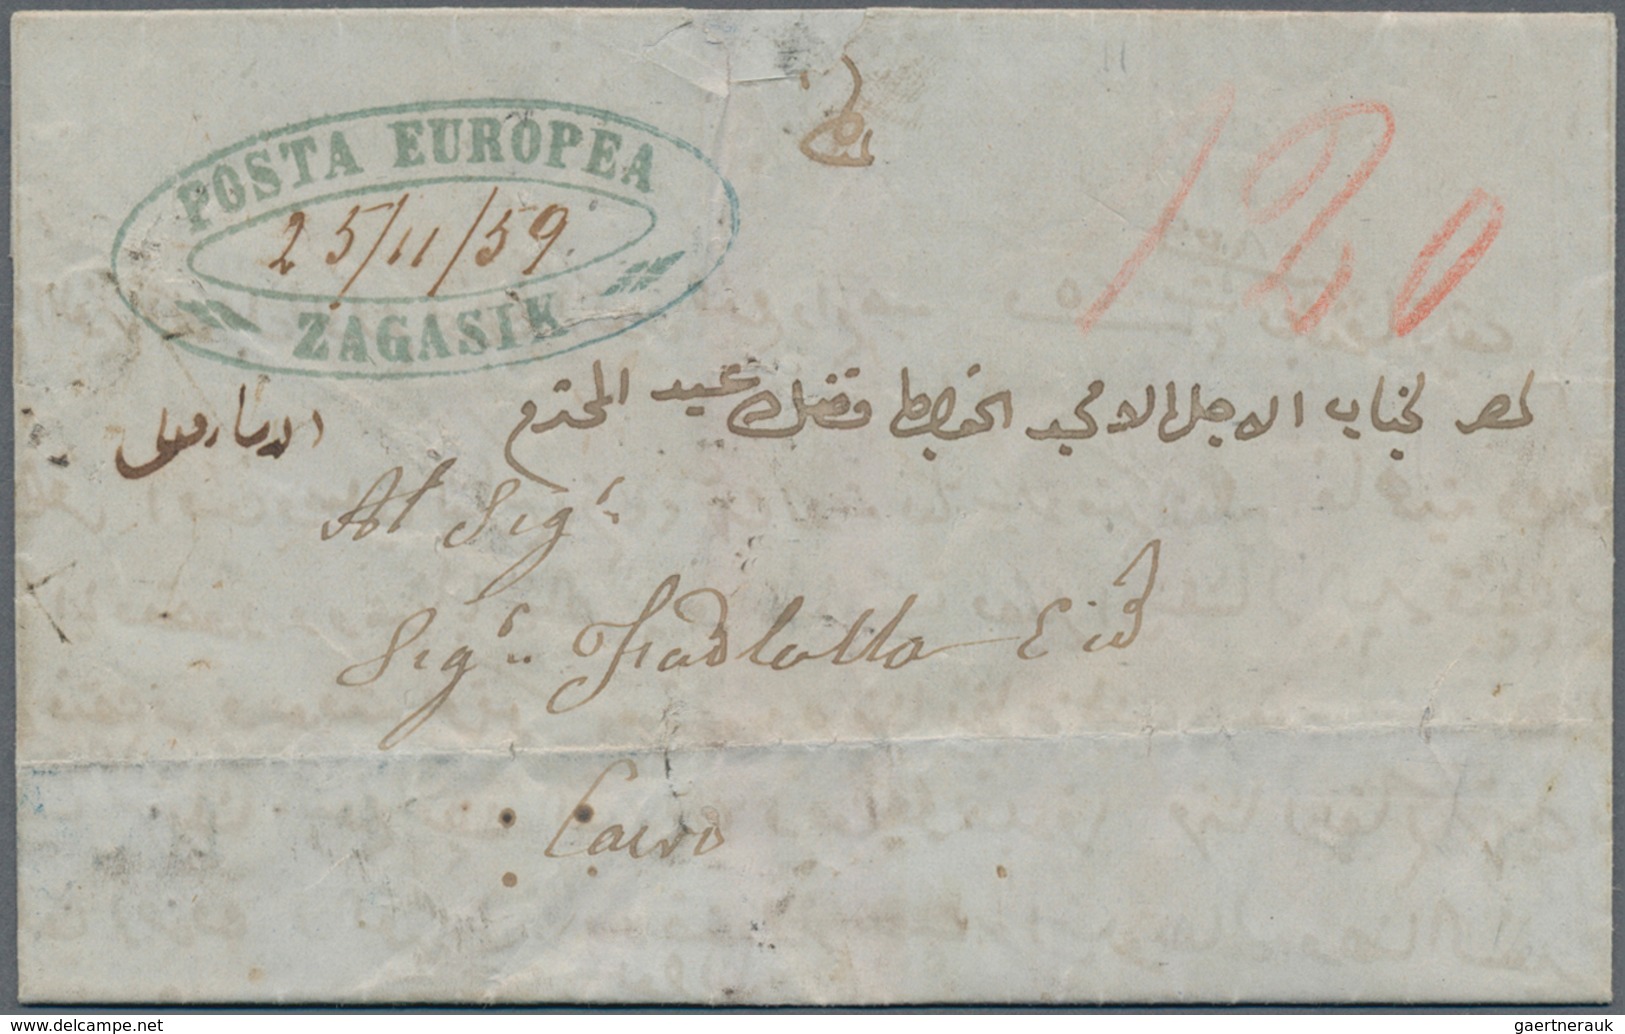 Ägypten - Vorphilatelie: 1853-65 "POSTA EUROPEA": Specialized Collection Of 18 Stampless Covers And - Voorfilatelie